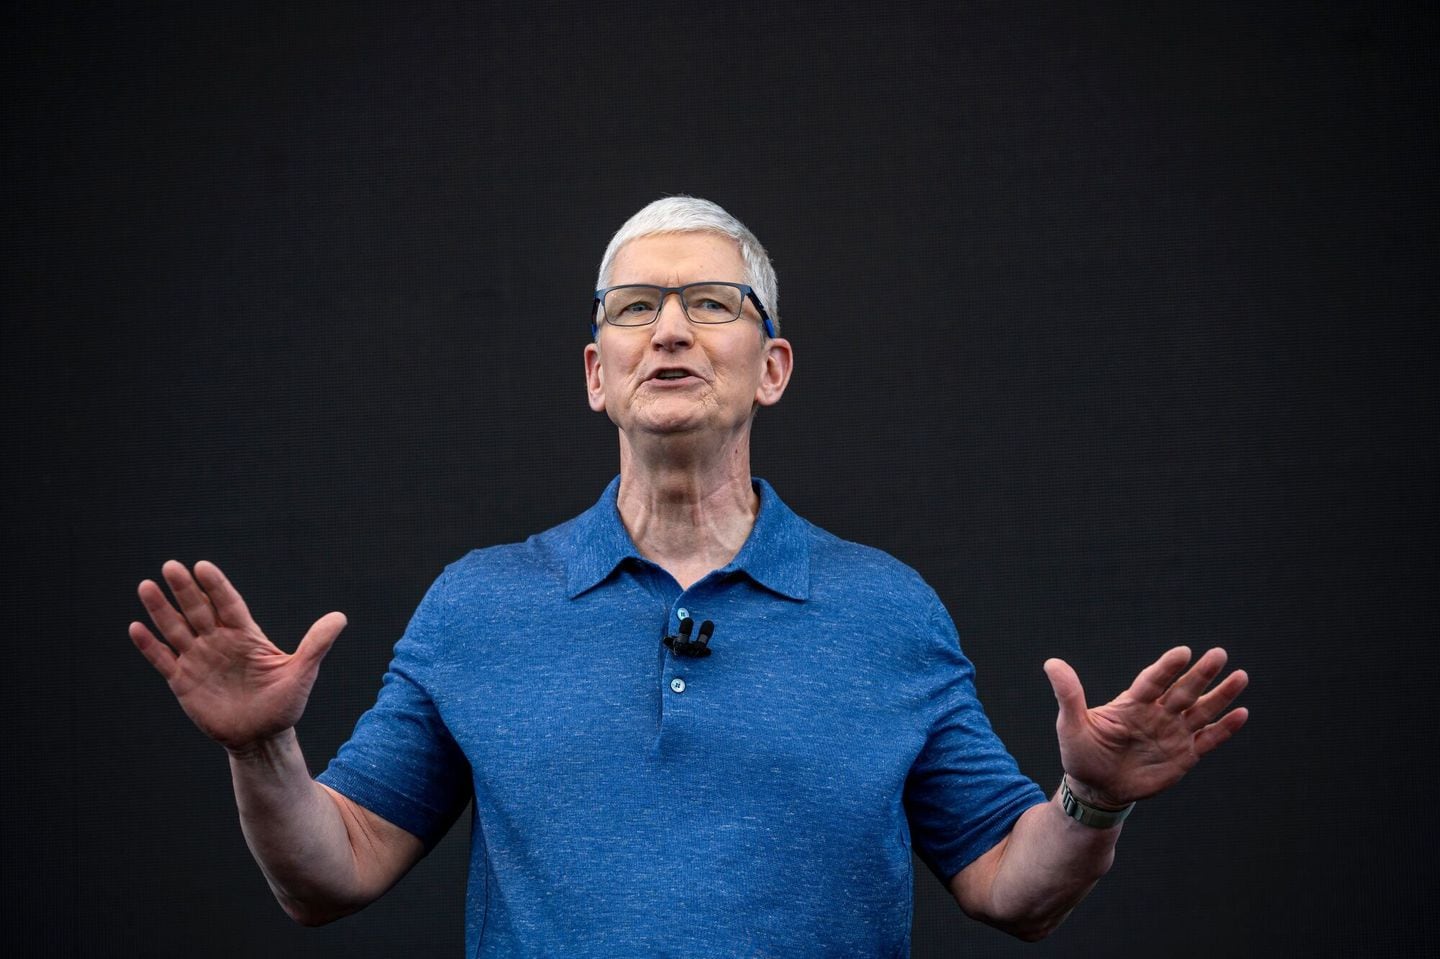 Tim Cook, chief executive of Apple, during the Apple Worldwide Developers Conference in Cupertino, Calif., on Monday.